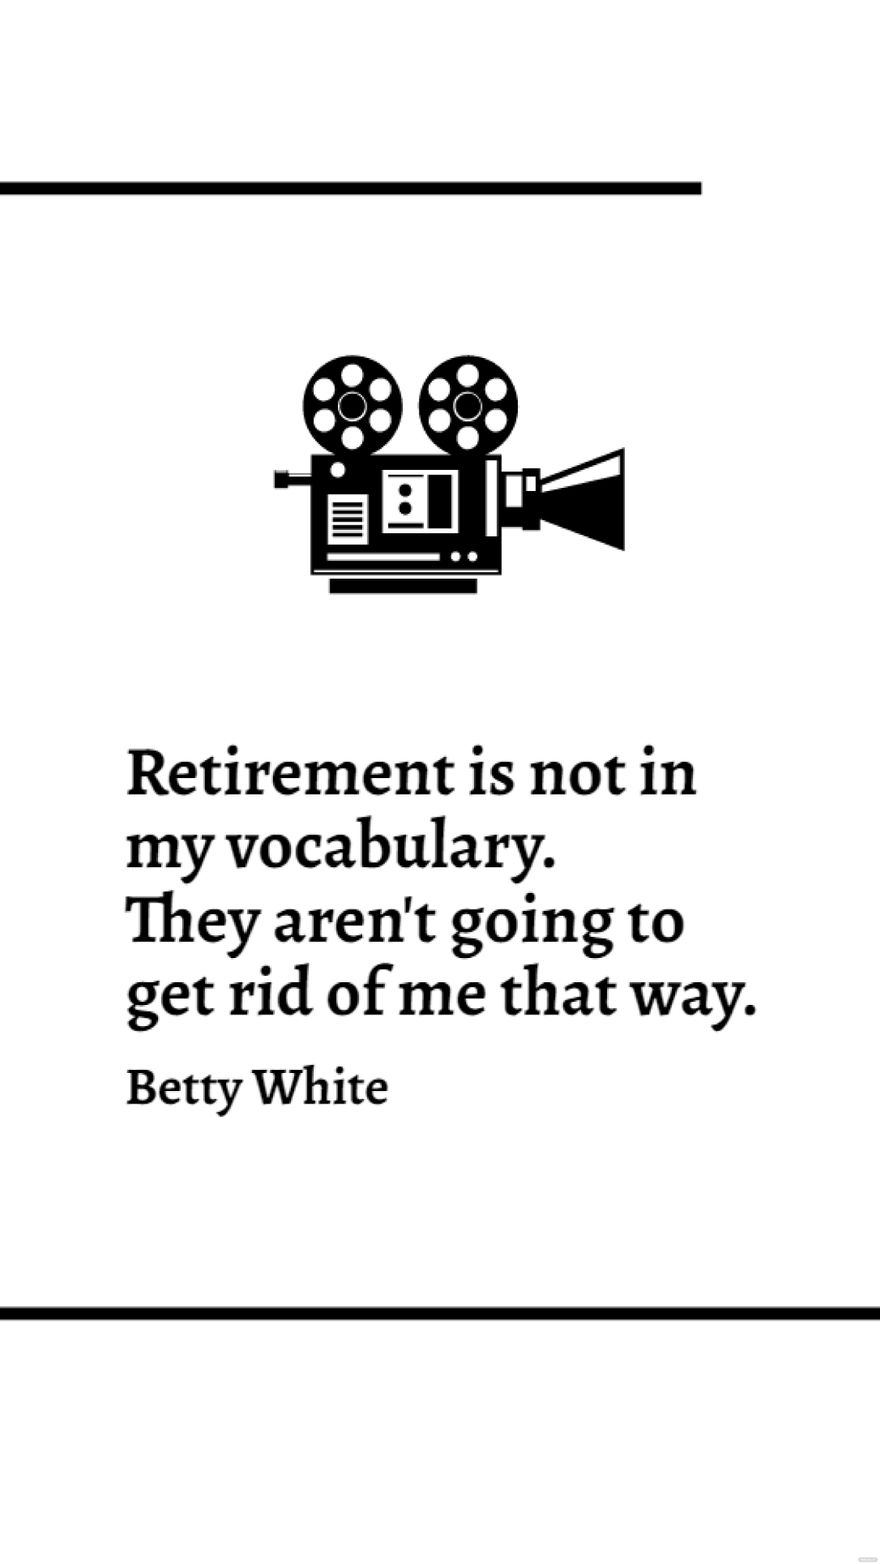 Betty White - Retirement is not in my vocabulary. They aren't going to get rid of me that way.